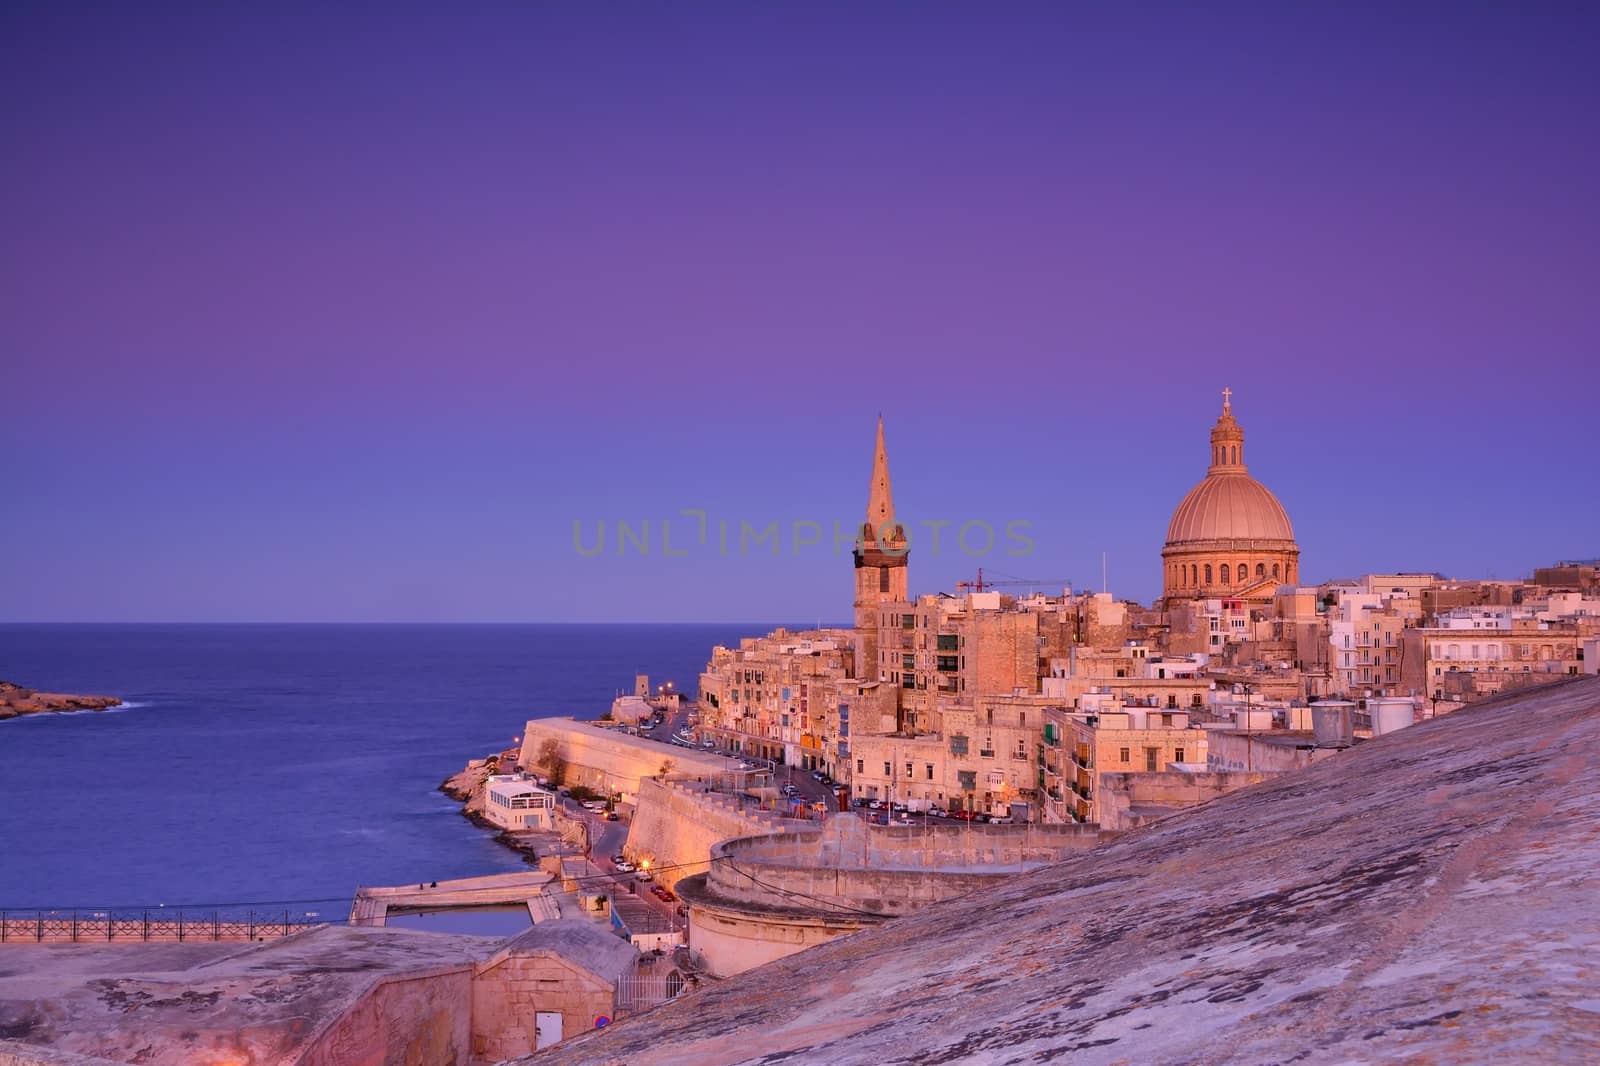 View from above of the golden dome of church and roofs with church of Our Lady of Mount Carmel and St. Paul's Cathedral in Valletta, Malta.